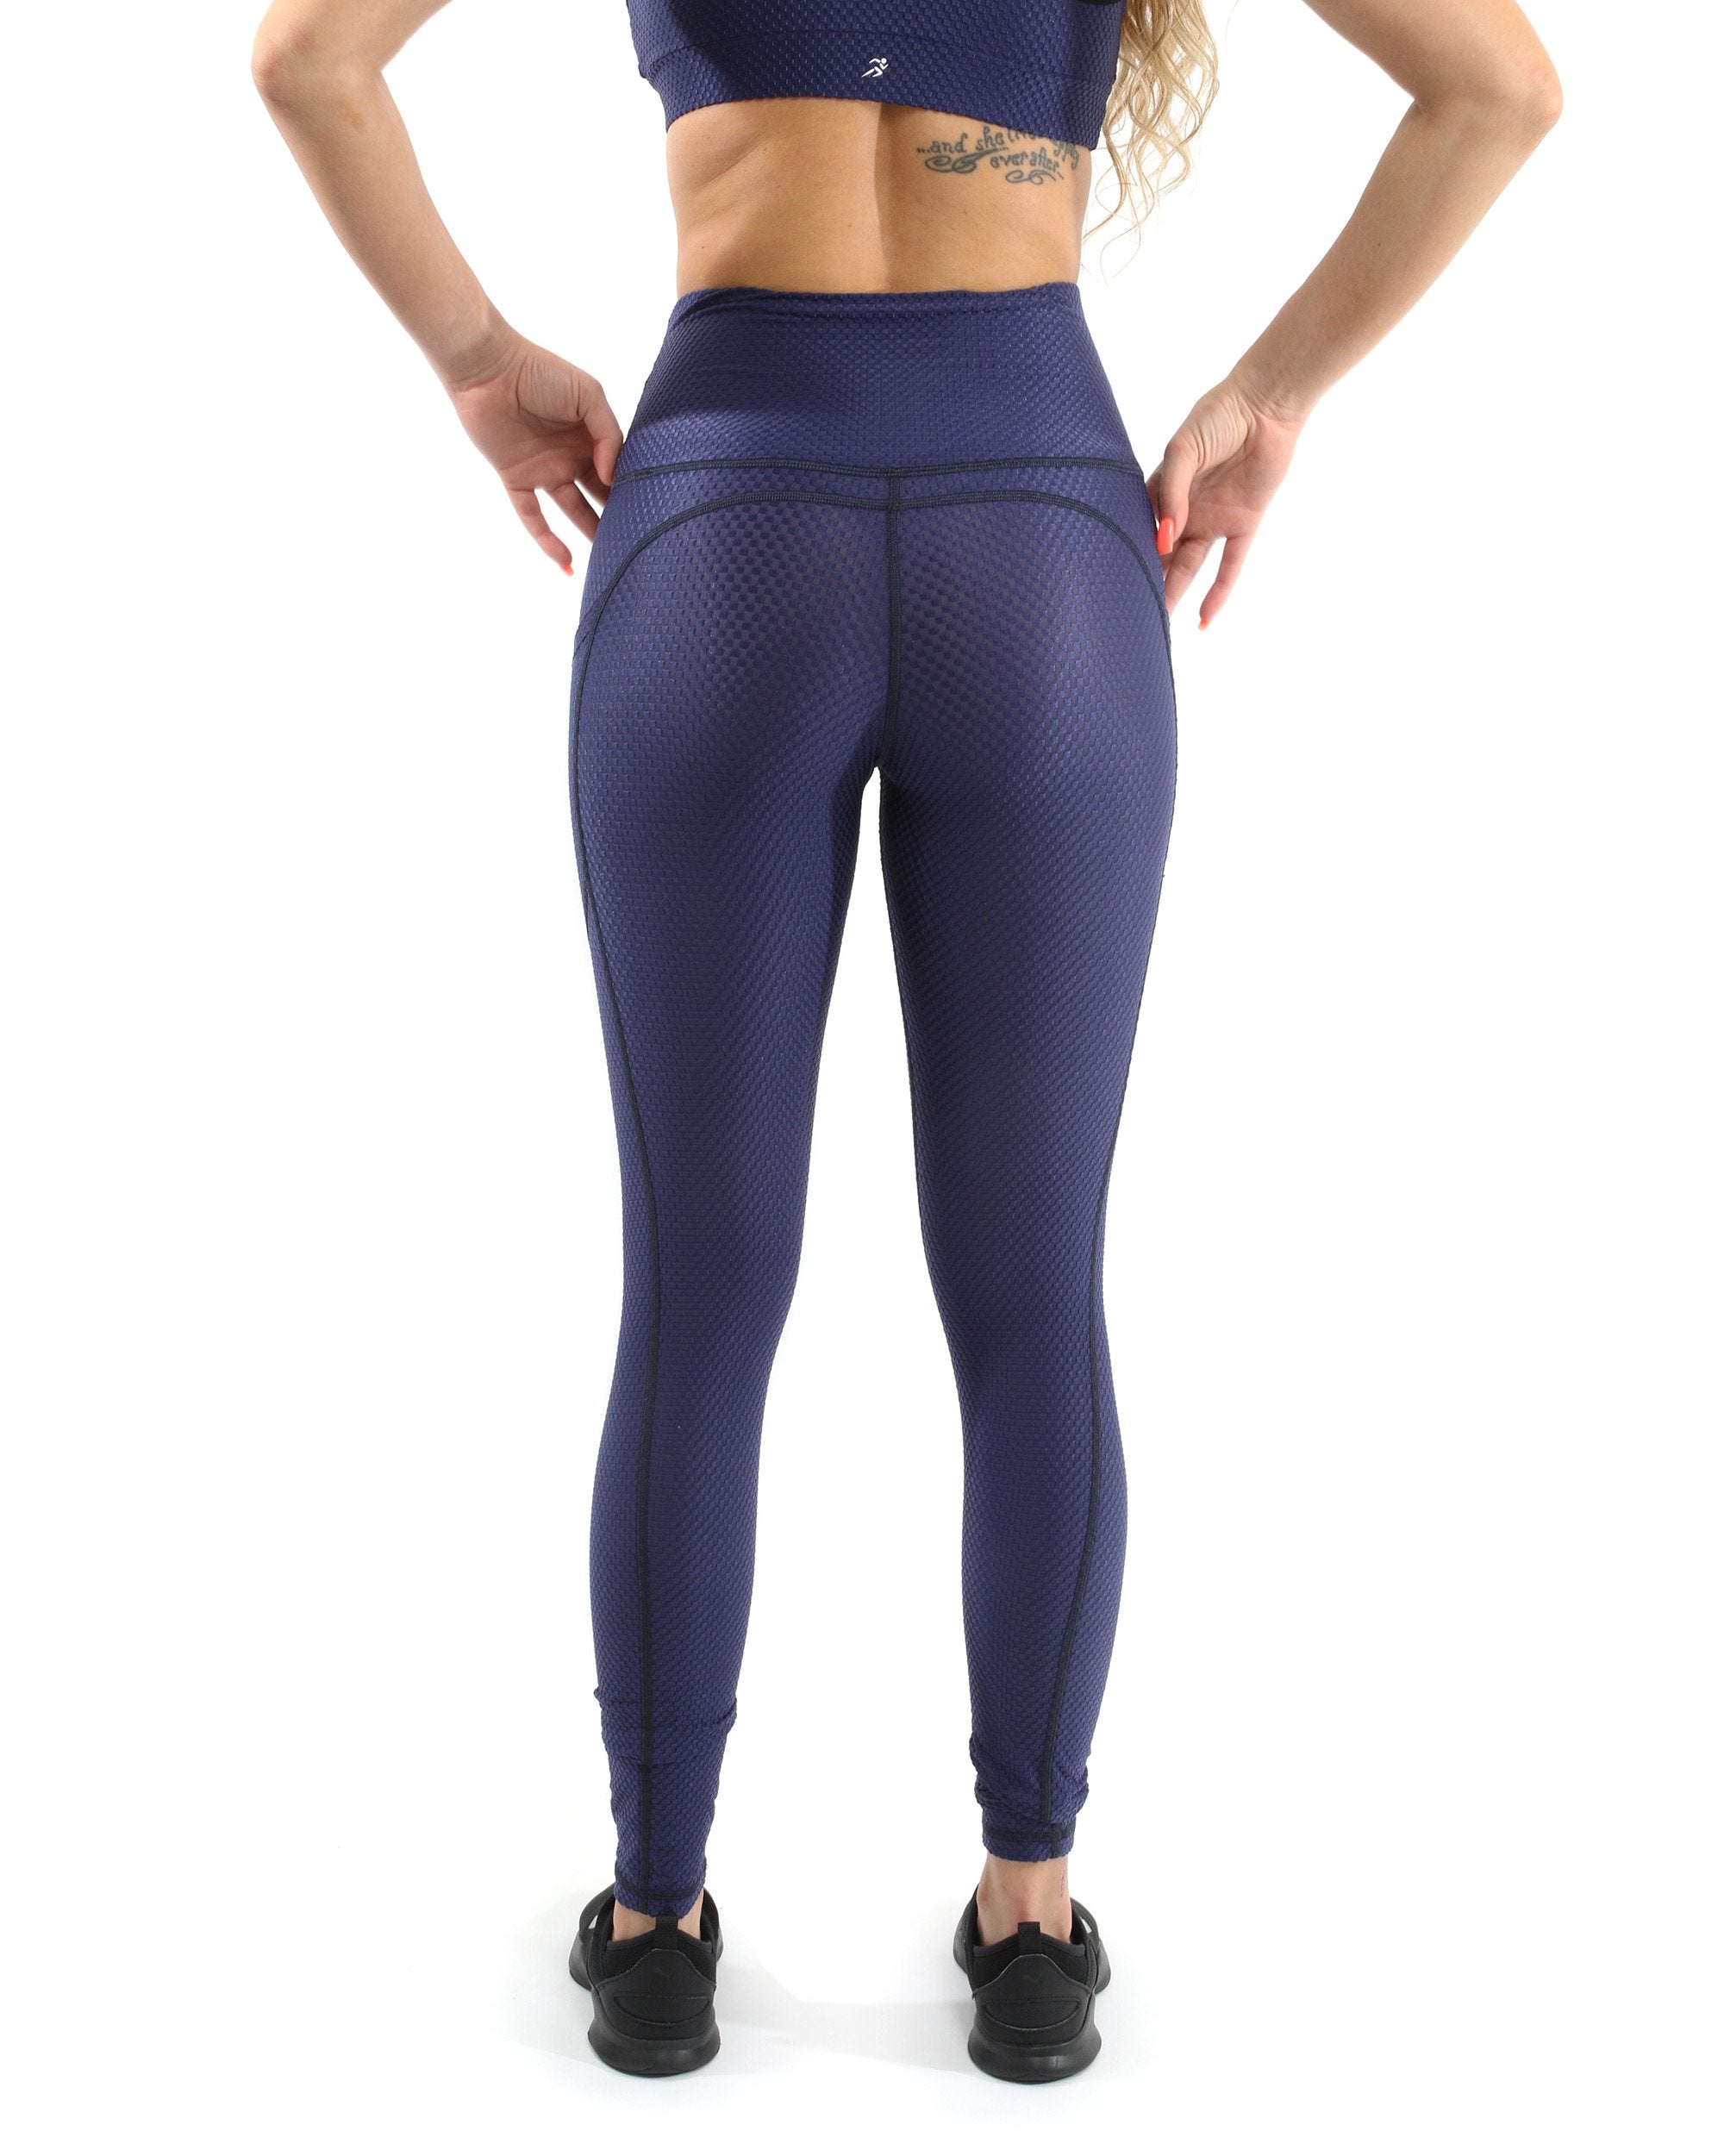 SALE! 50% OFF! Venice Activewear Set - Leggings & Sports Bra - Navy [MADE IN ITALY] - Size Small